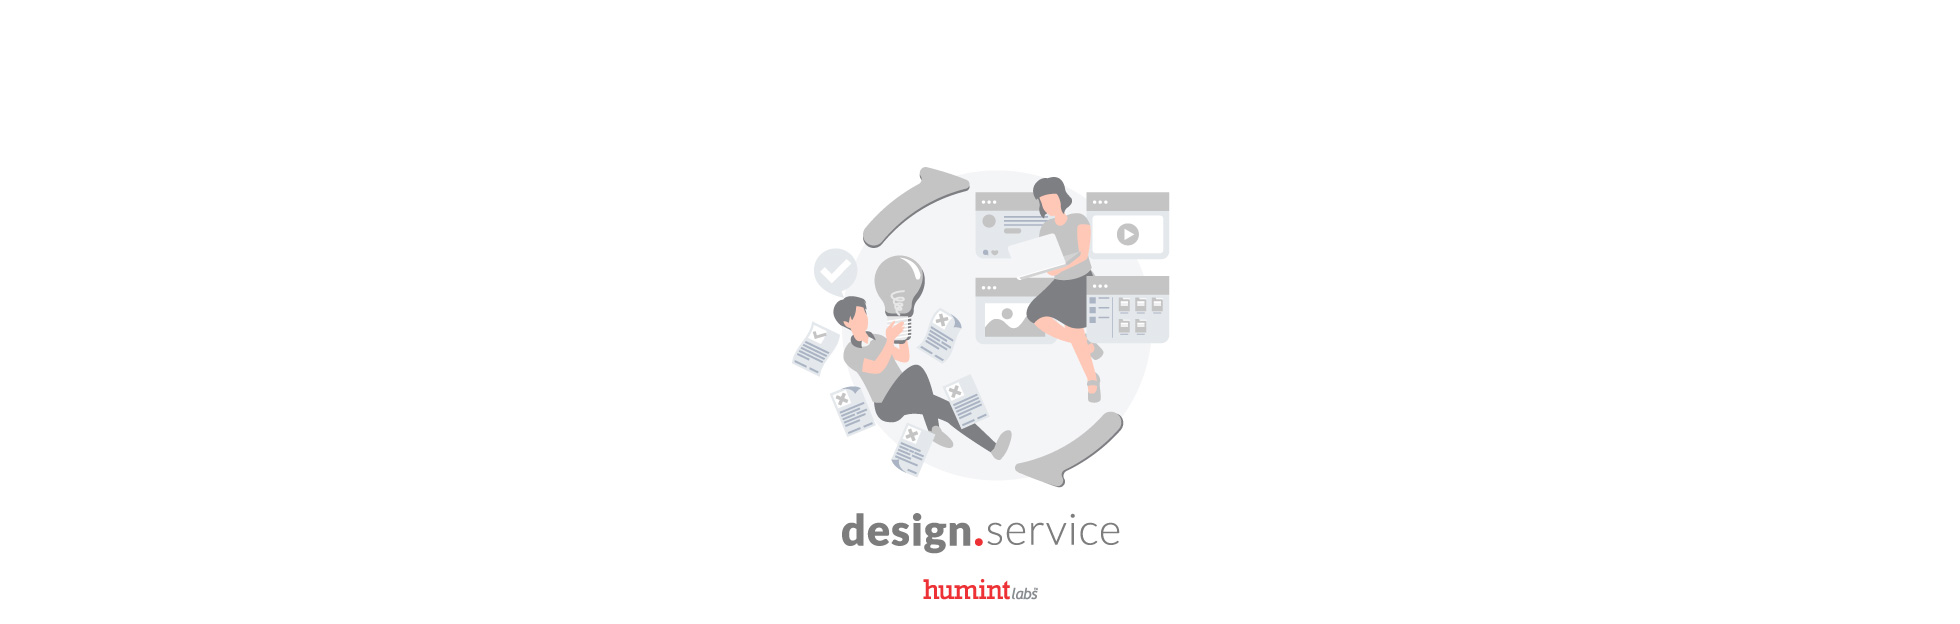 Humint Labs - Design Services